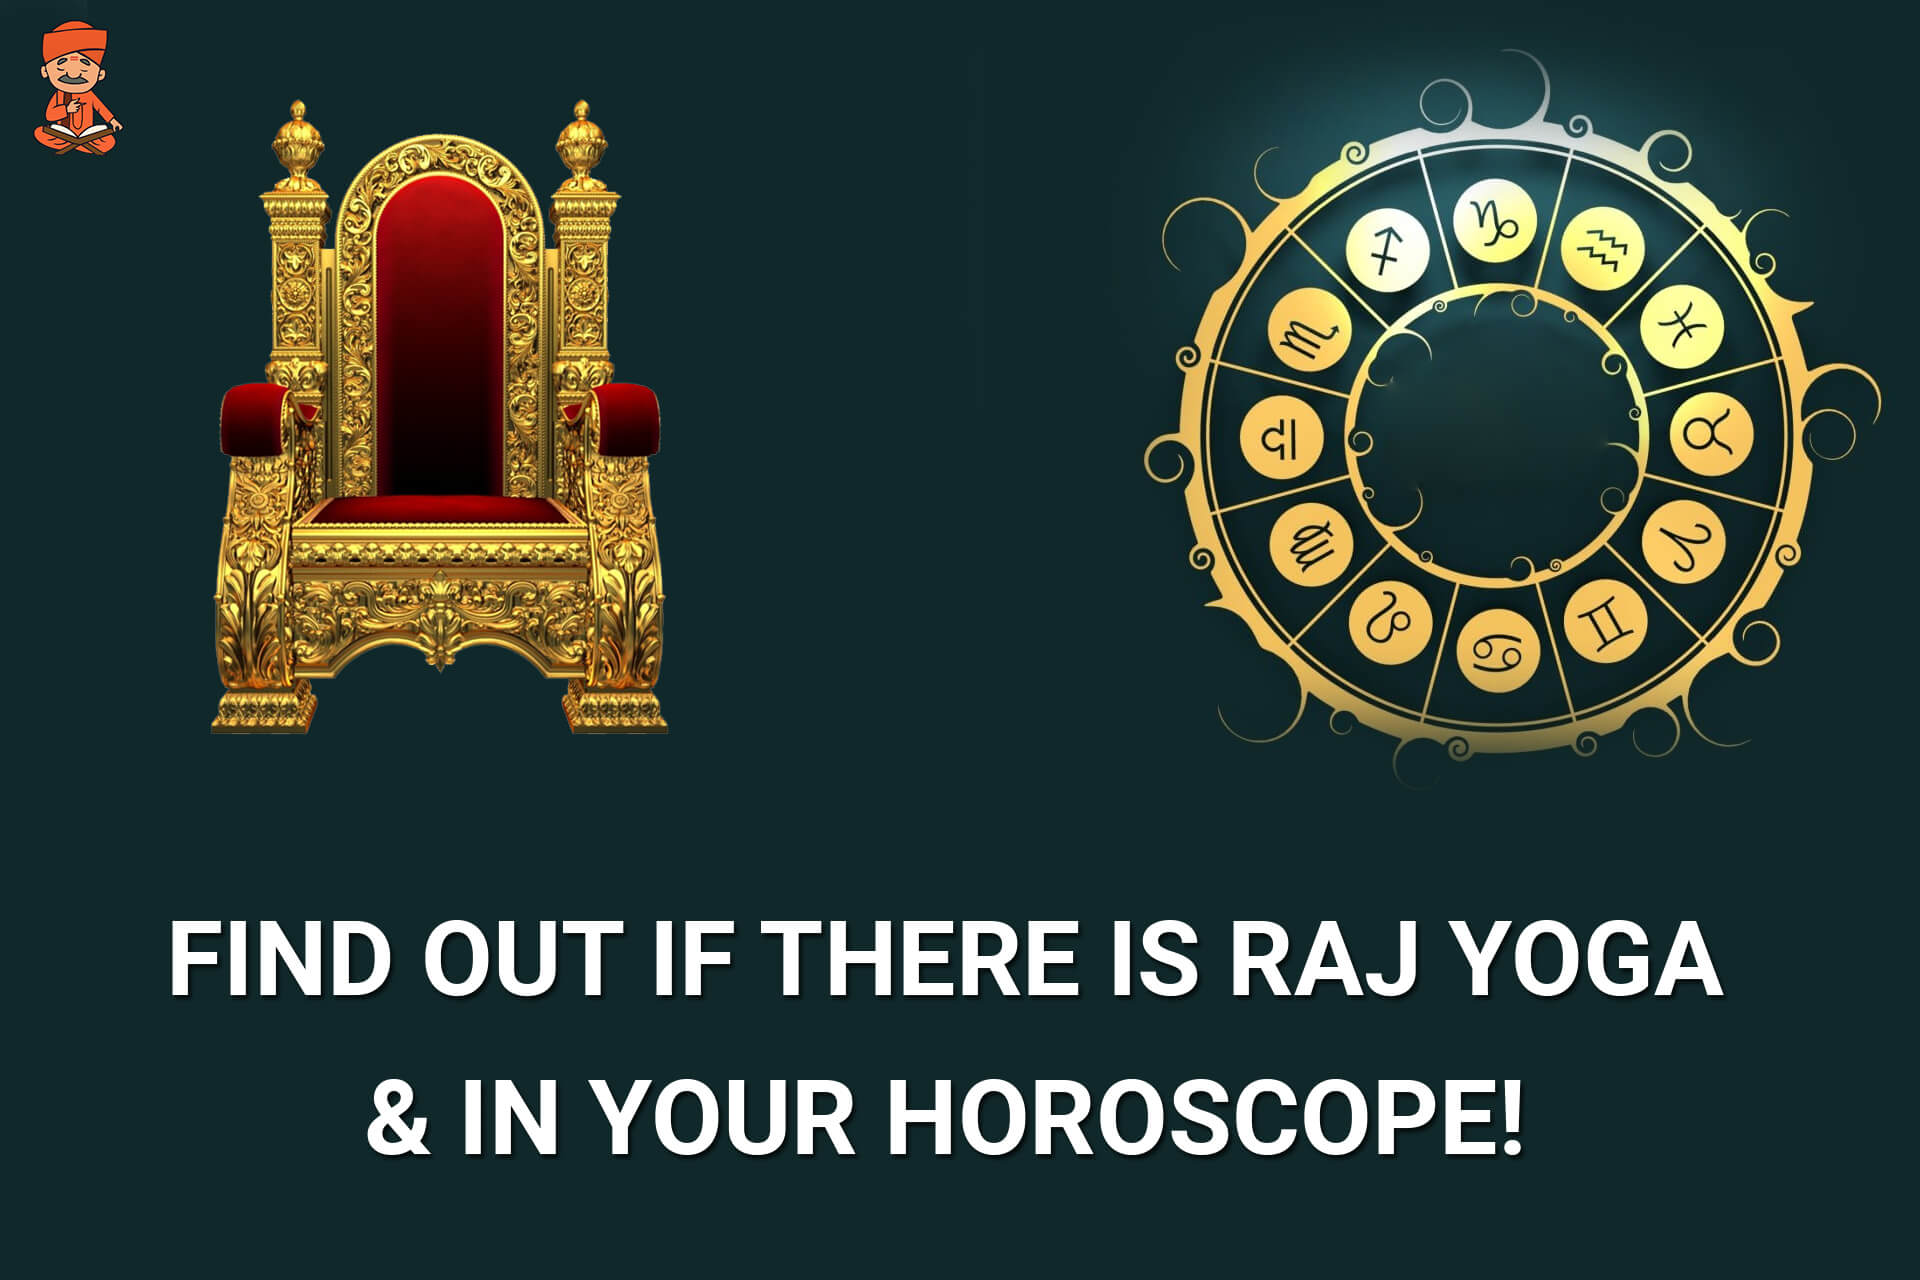 Find Out If There is ‘Raj Yoga’ in Your Horoscope!